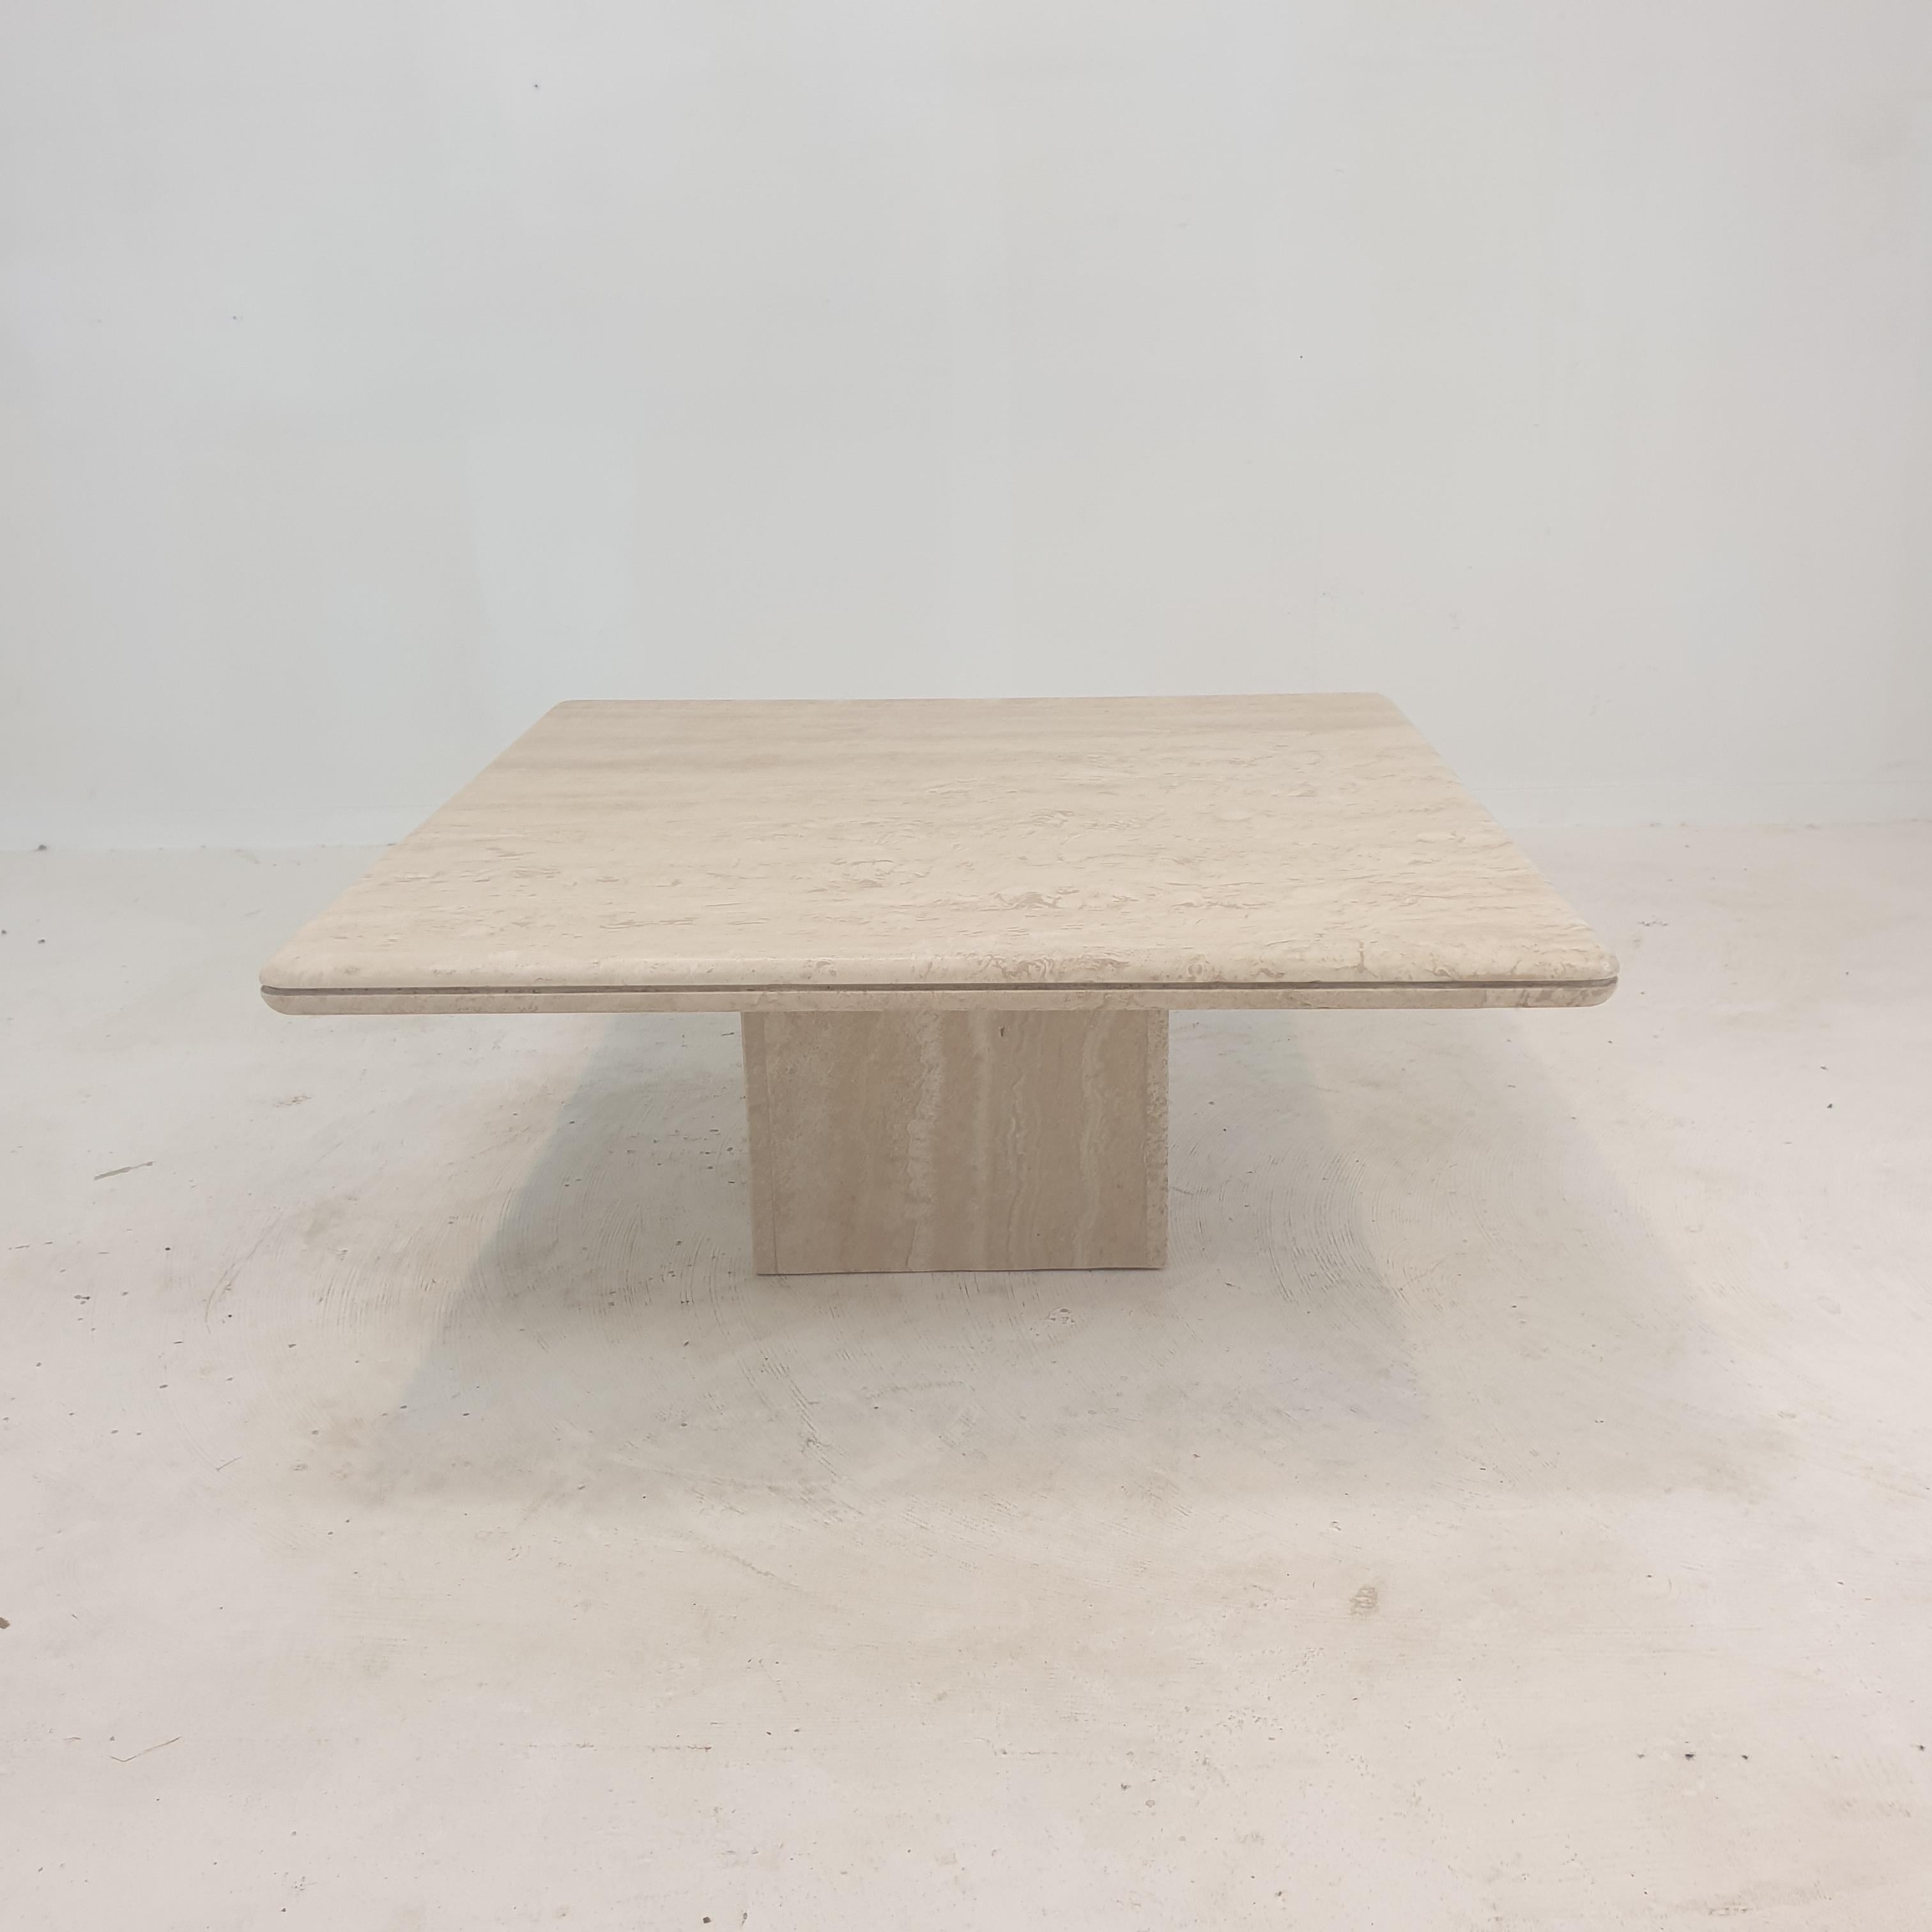 Very nice Italian coffee table handcrafted out of travertine, 1980's.

The beautiful square top is rounded on the edge. 
It is made of beautiful travertine.

It has the normal traces of use, see the pictures.

We work with professional